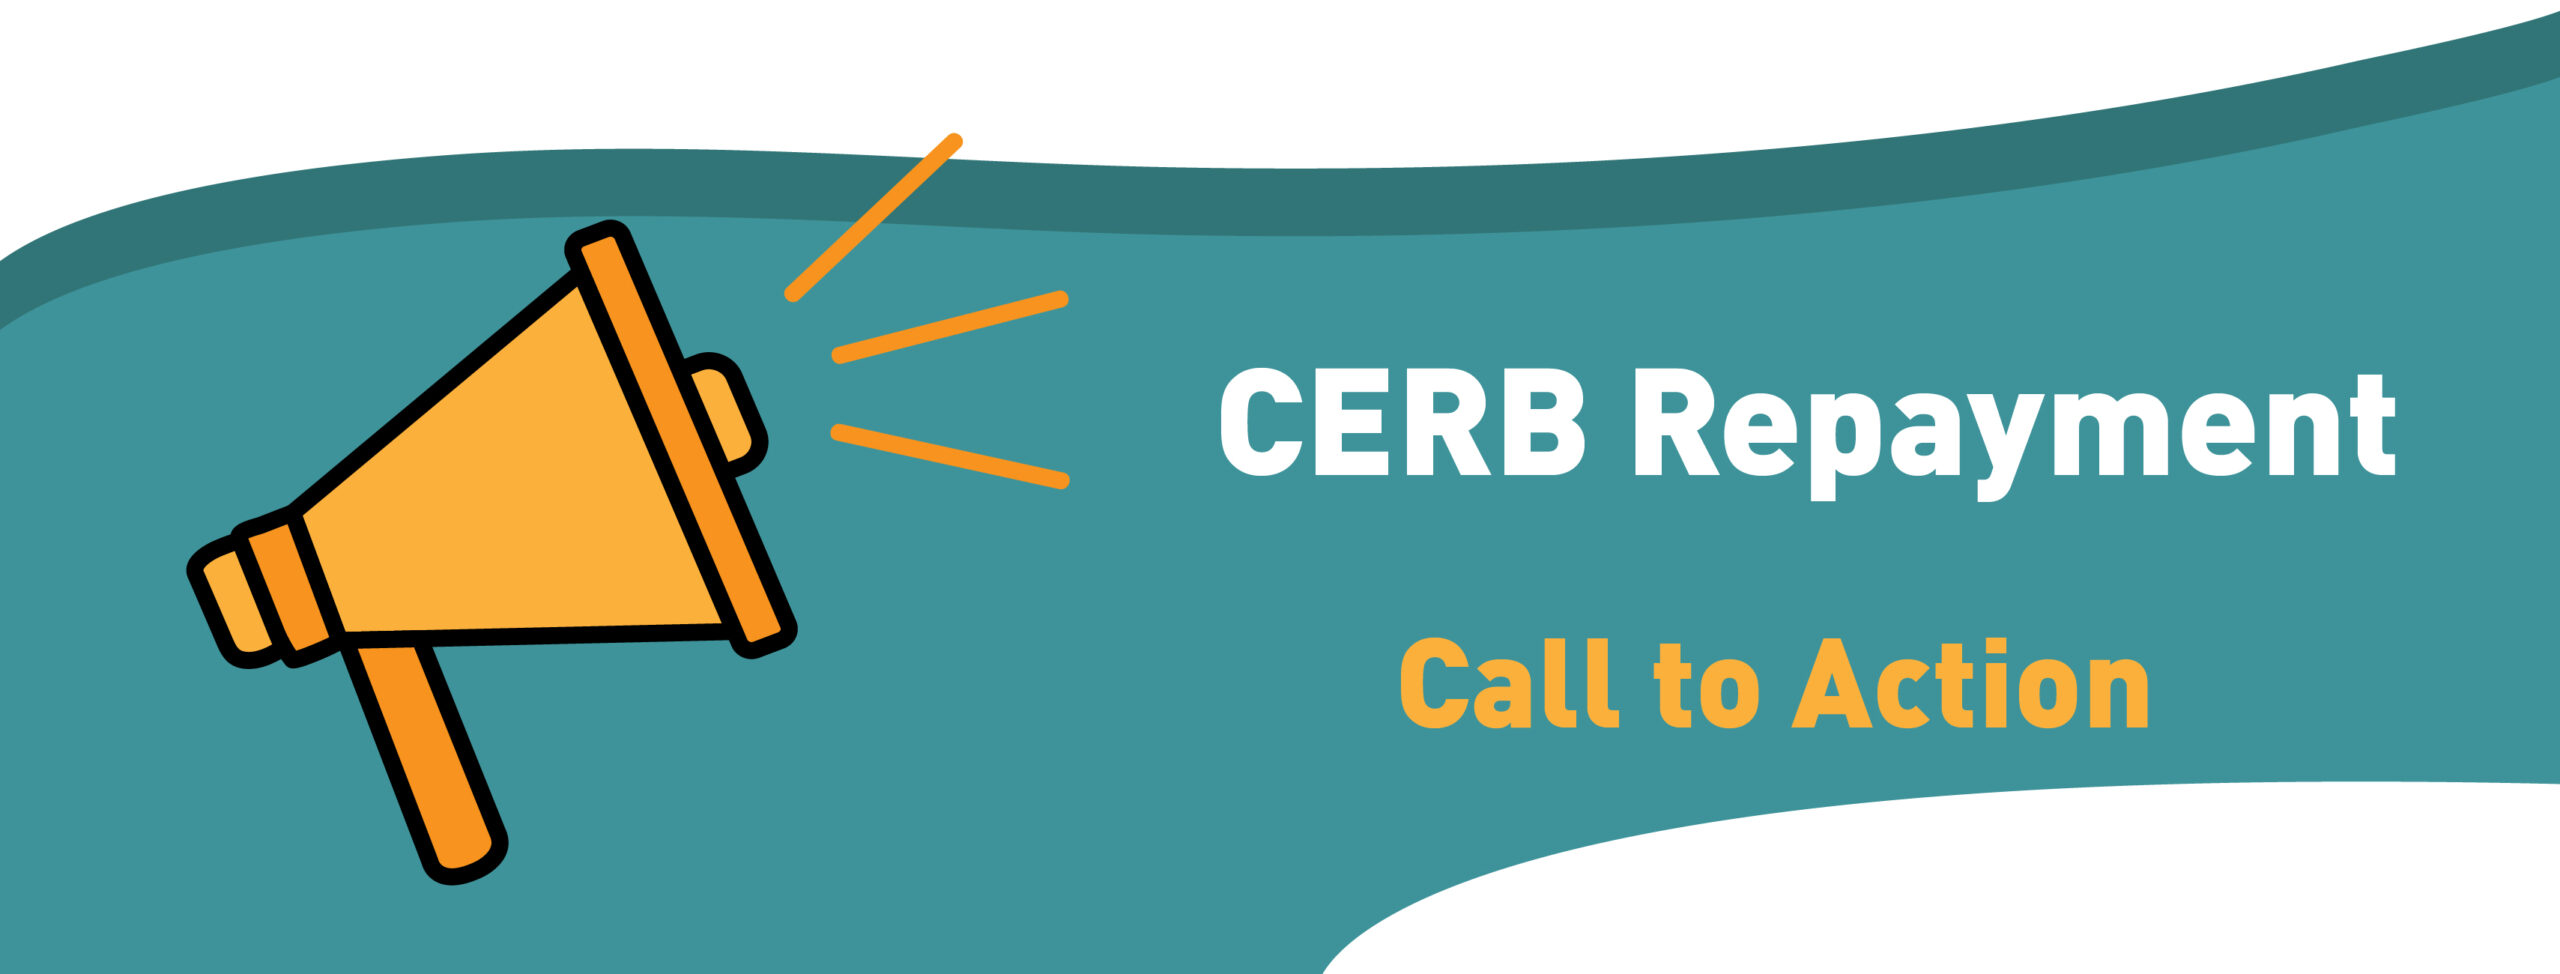 Banner with megaphone graphic: CERB Repayment: Call to Action